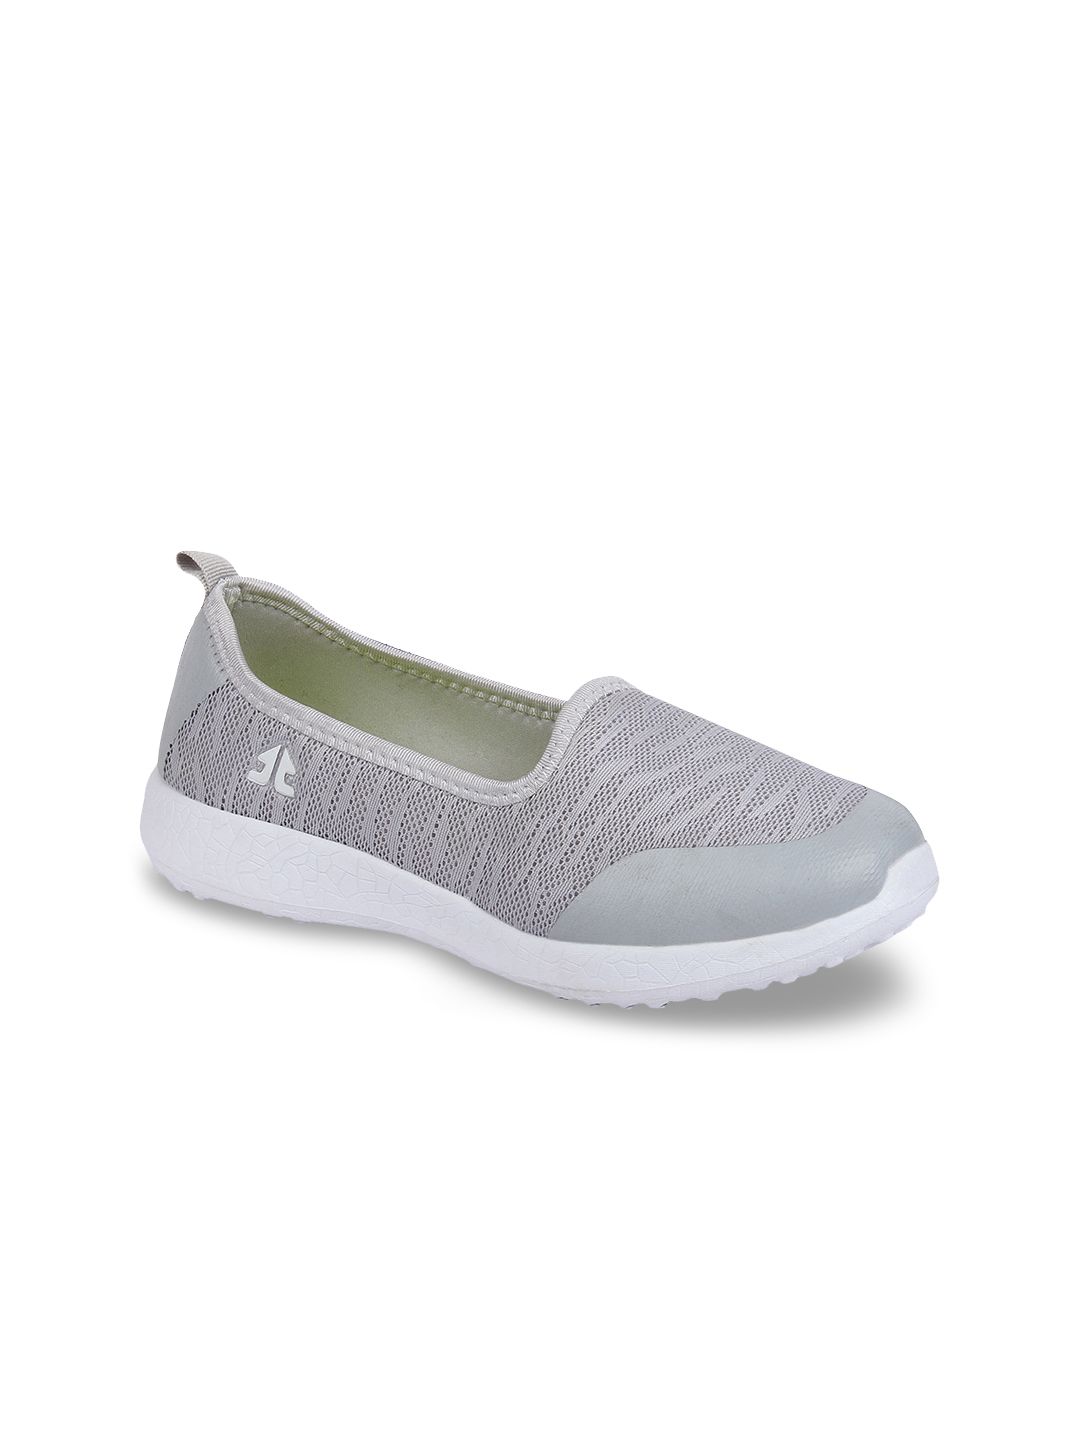 OFF LIMITS Women Grey Running Shoes Price in India